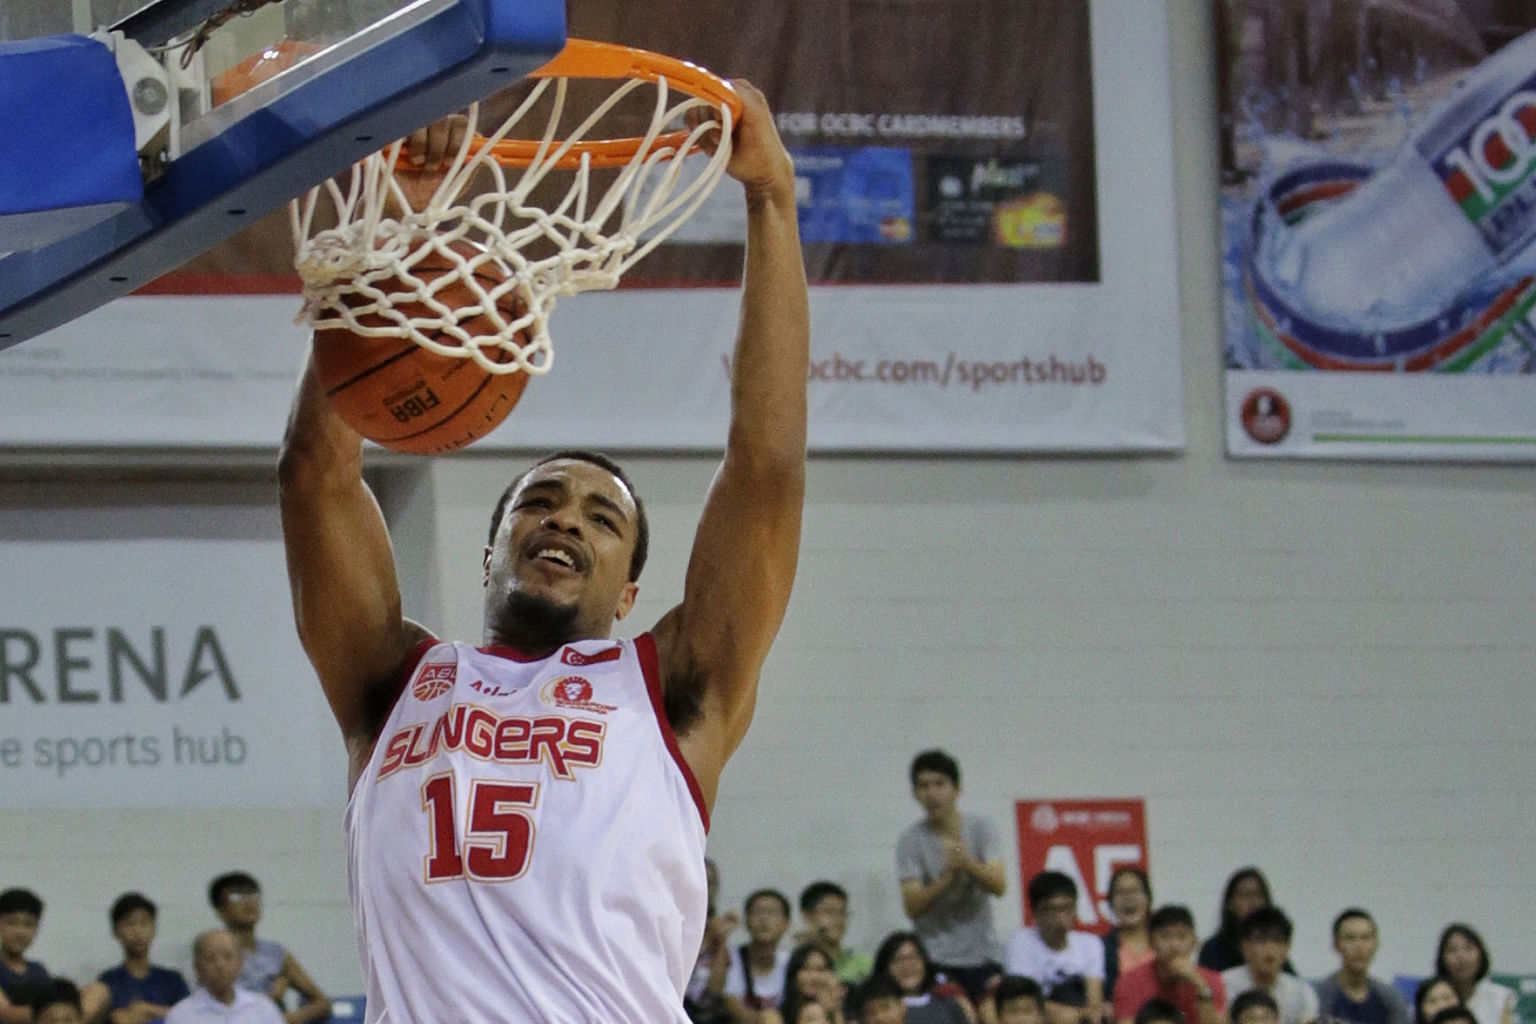 Singapore Slingers' Xavier Alexander dunking as Hi-Tech Bangkok City's Piyapong Piroon watches. Alexander was guilty of missing crucial free throws in the fourth quarter at the OCBC Arena yesterday.